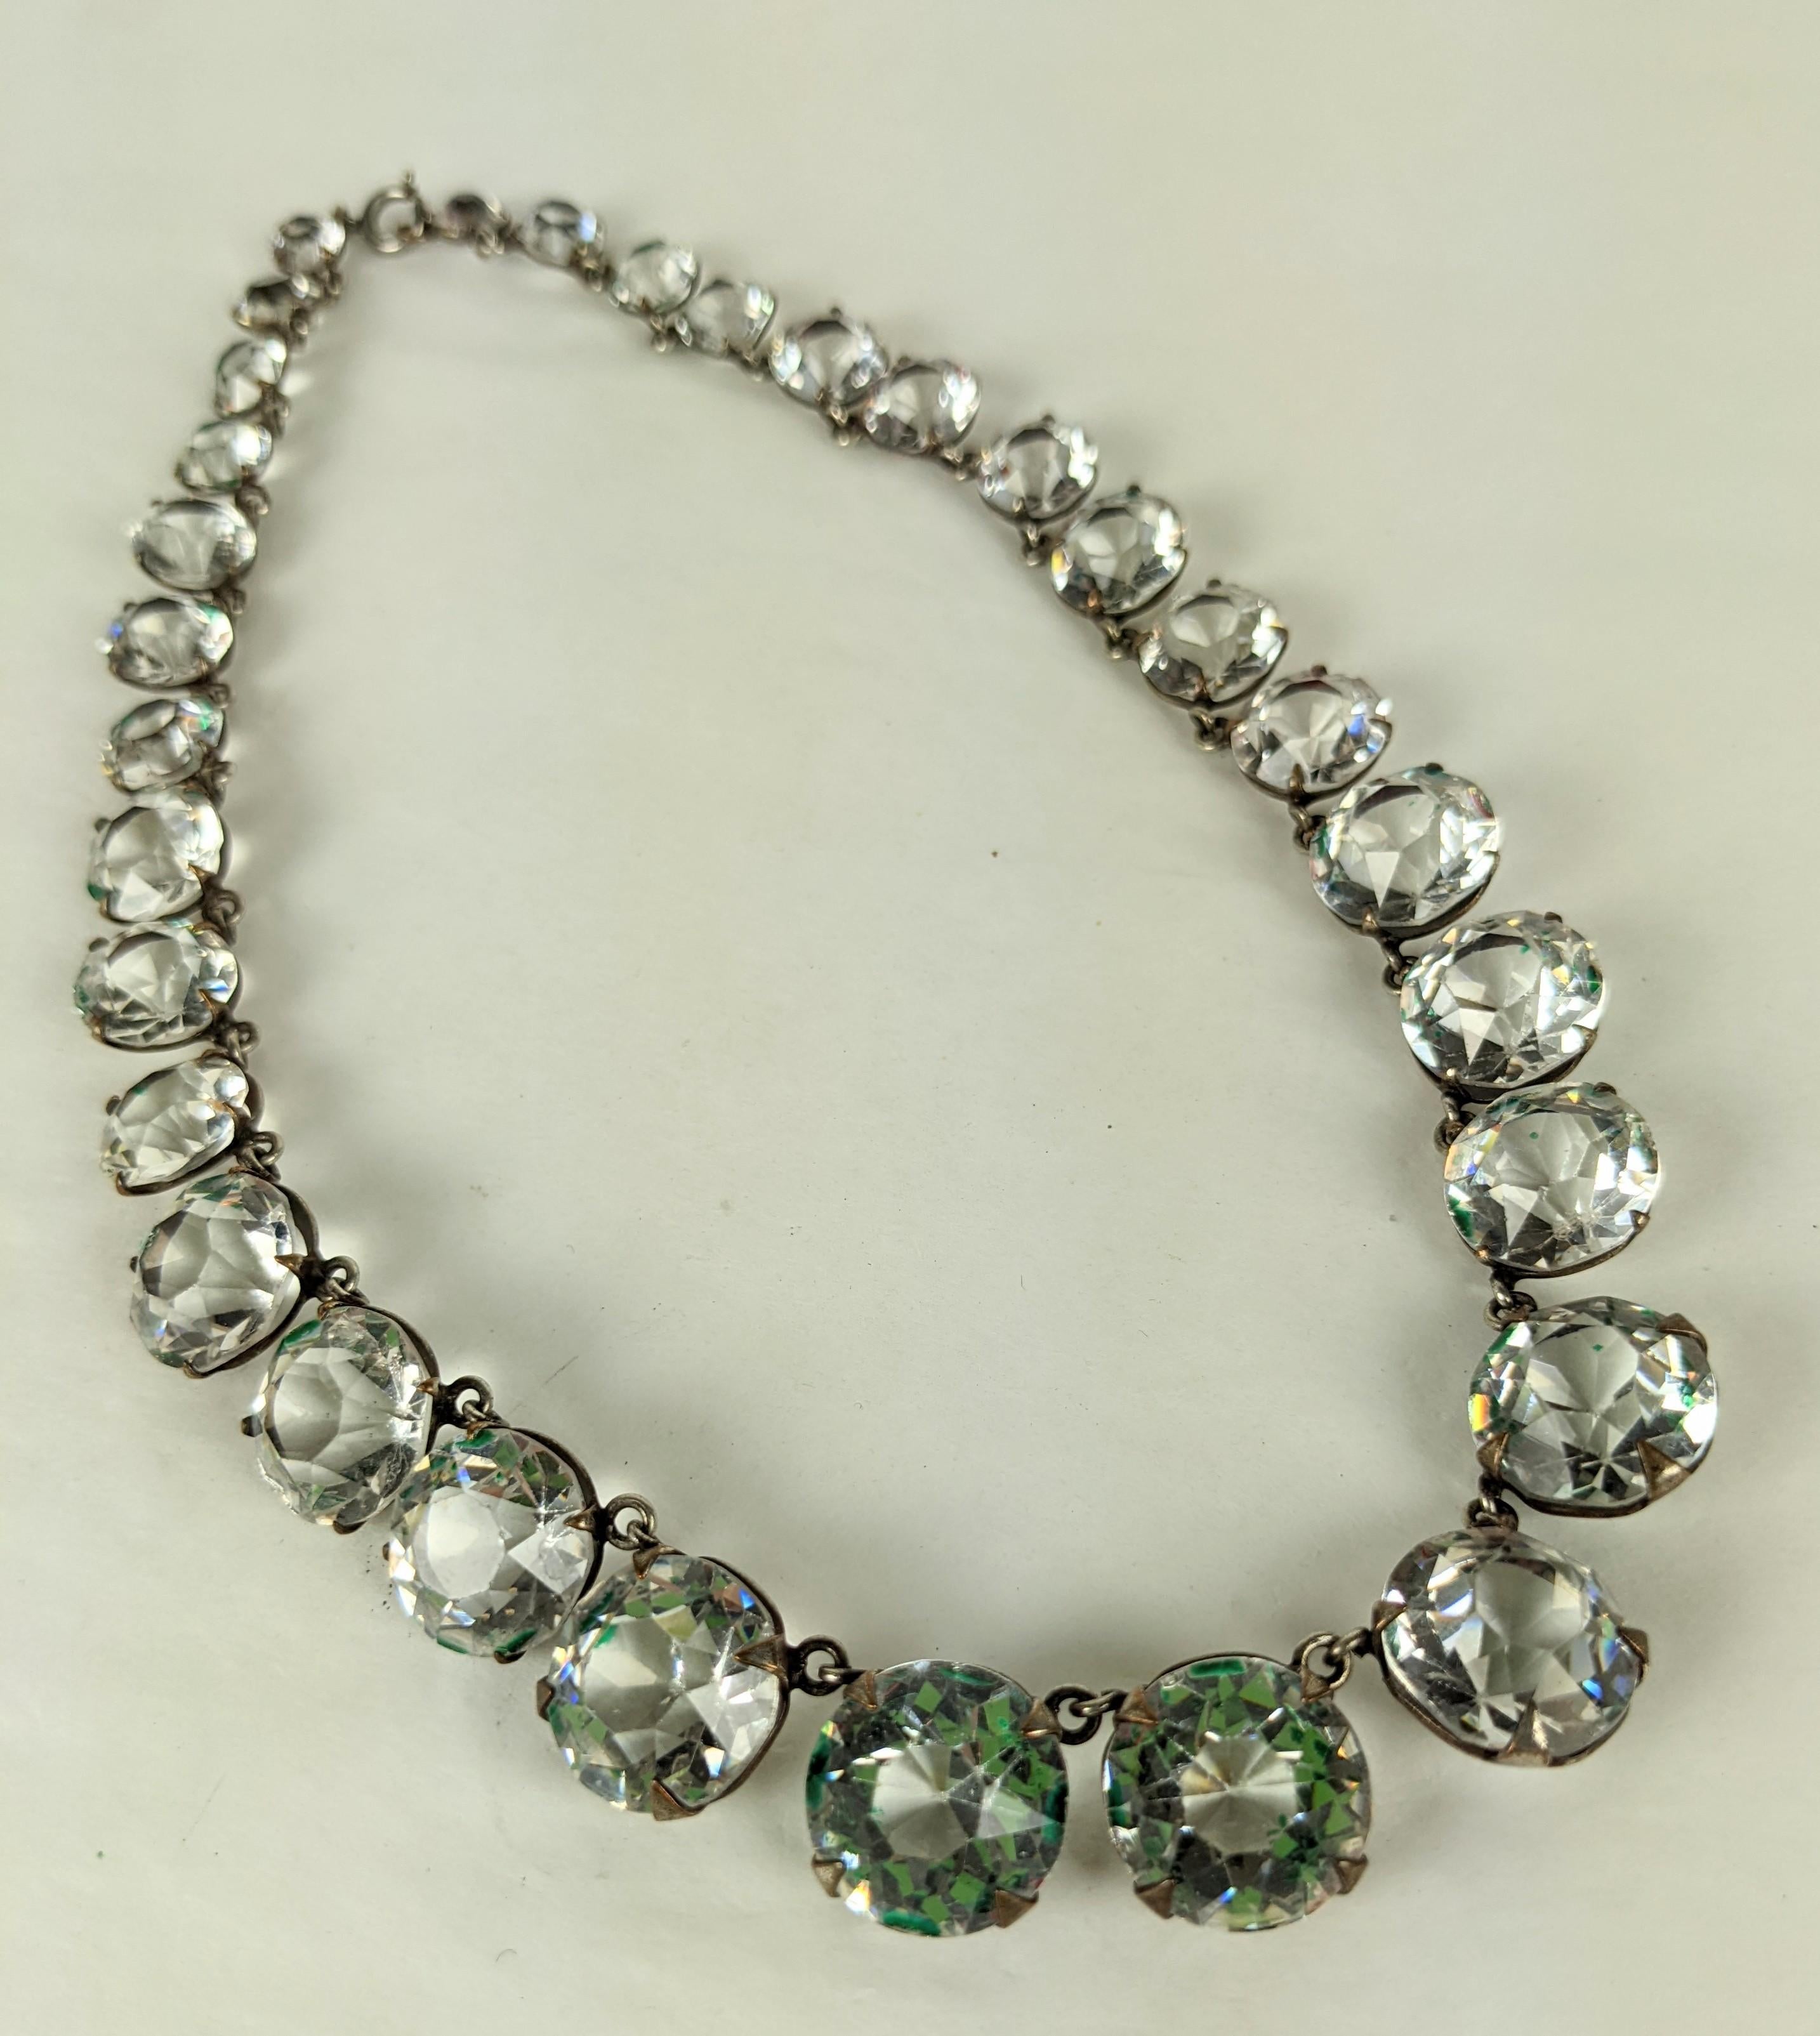 Attractive Art Deco Paste Graduated Crystals from the 1920's. Faceted lead crystal sparkles brightly in this riviere style. This probably had an emerald stain at one point and there are little hints of green left which is not terribly noticeable.